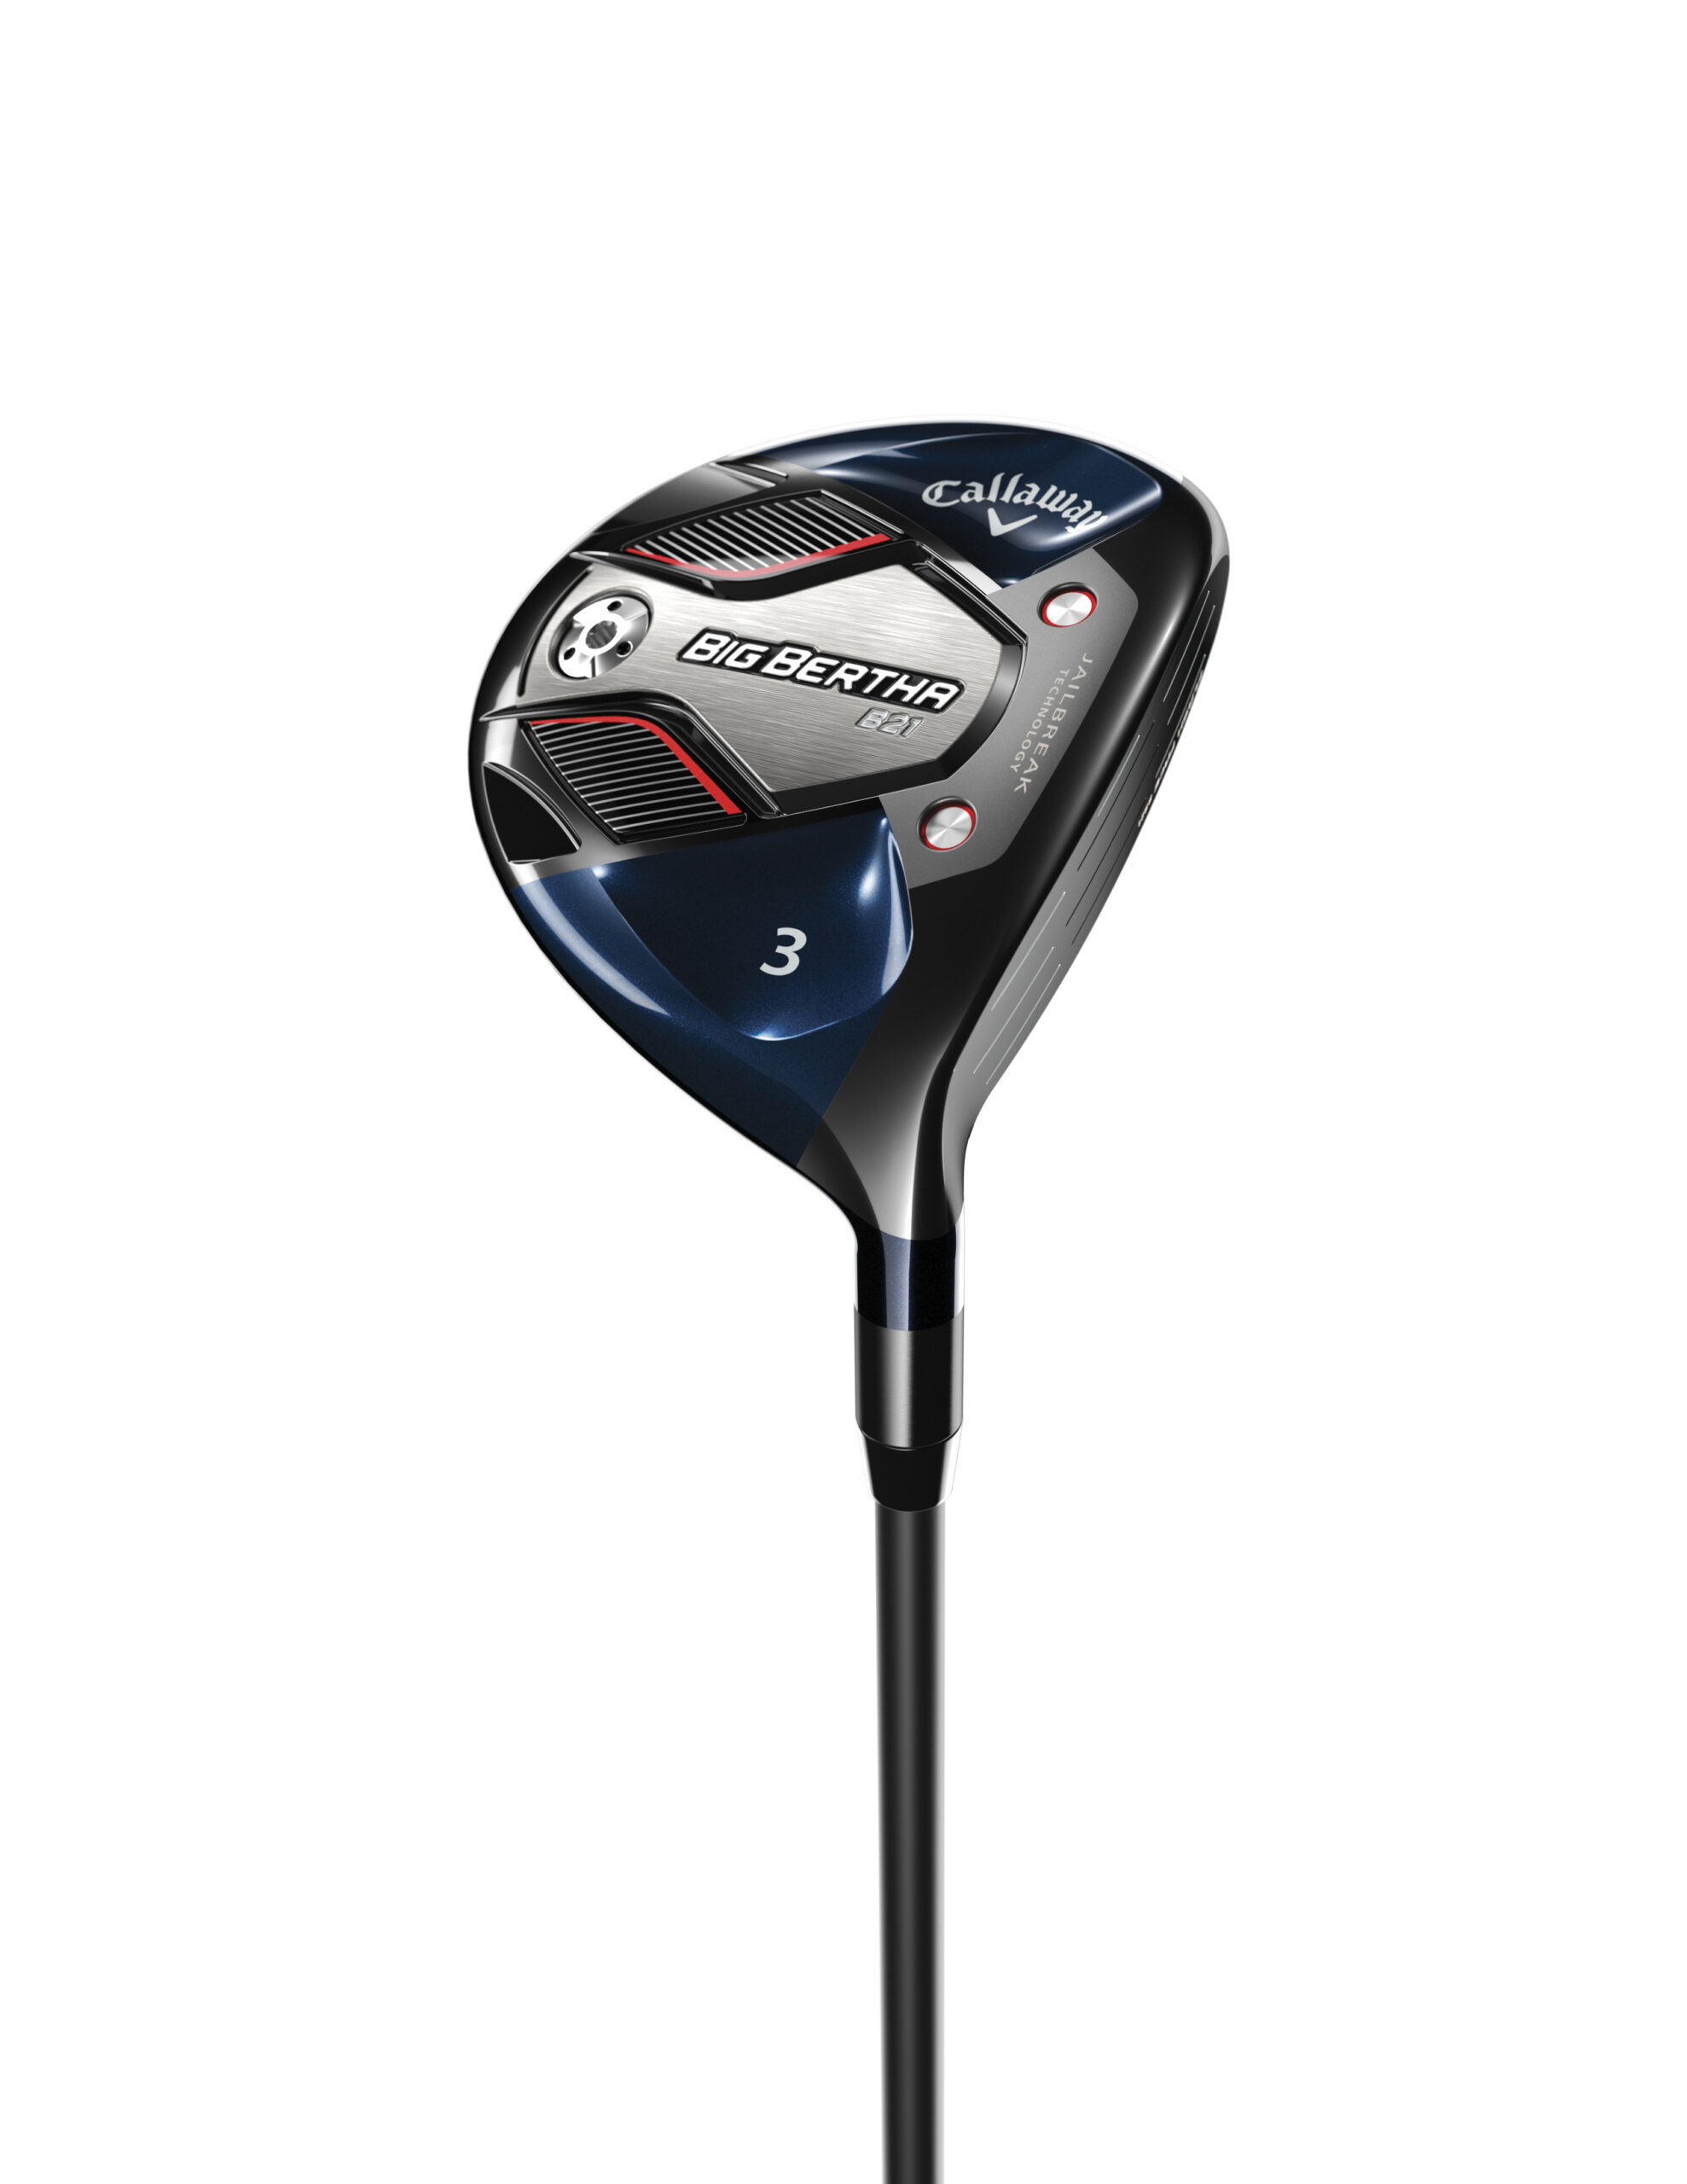 Callaway's Big Bertha gets an upgrade to go farther & straighter